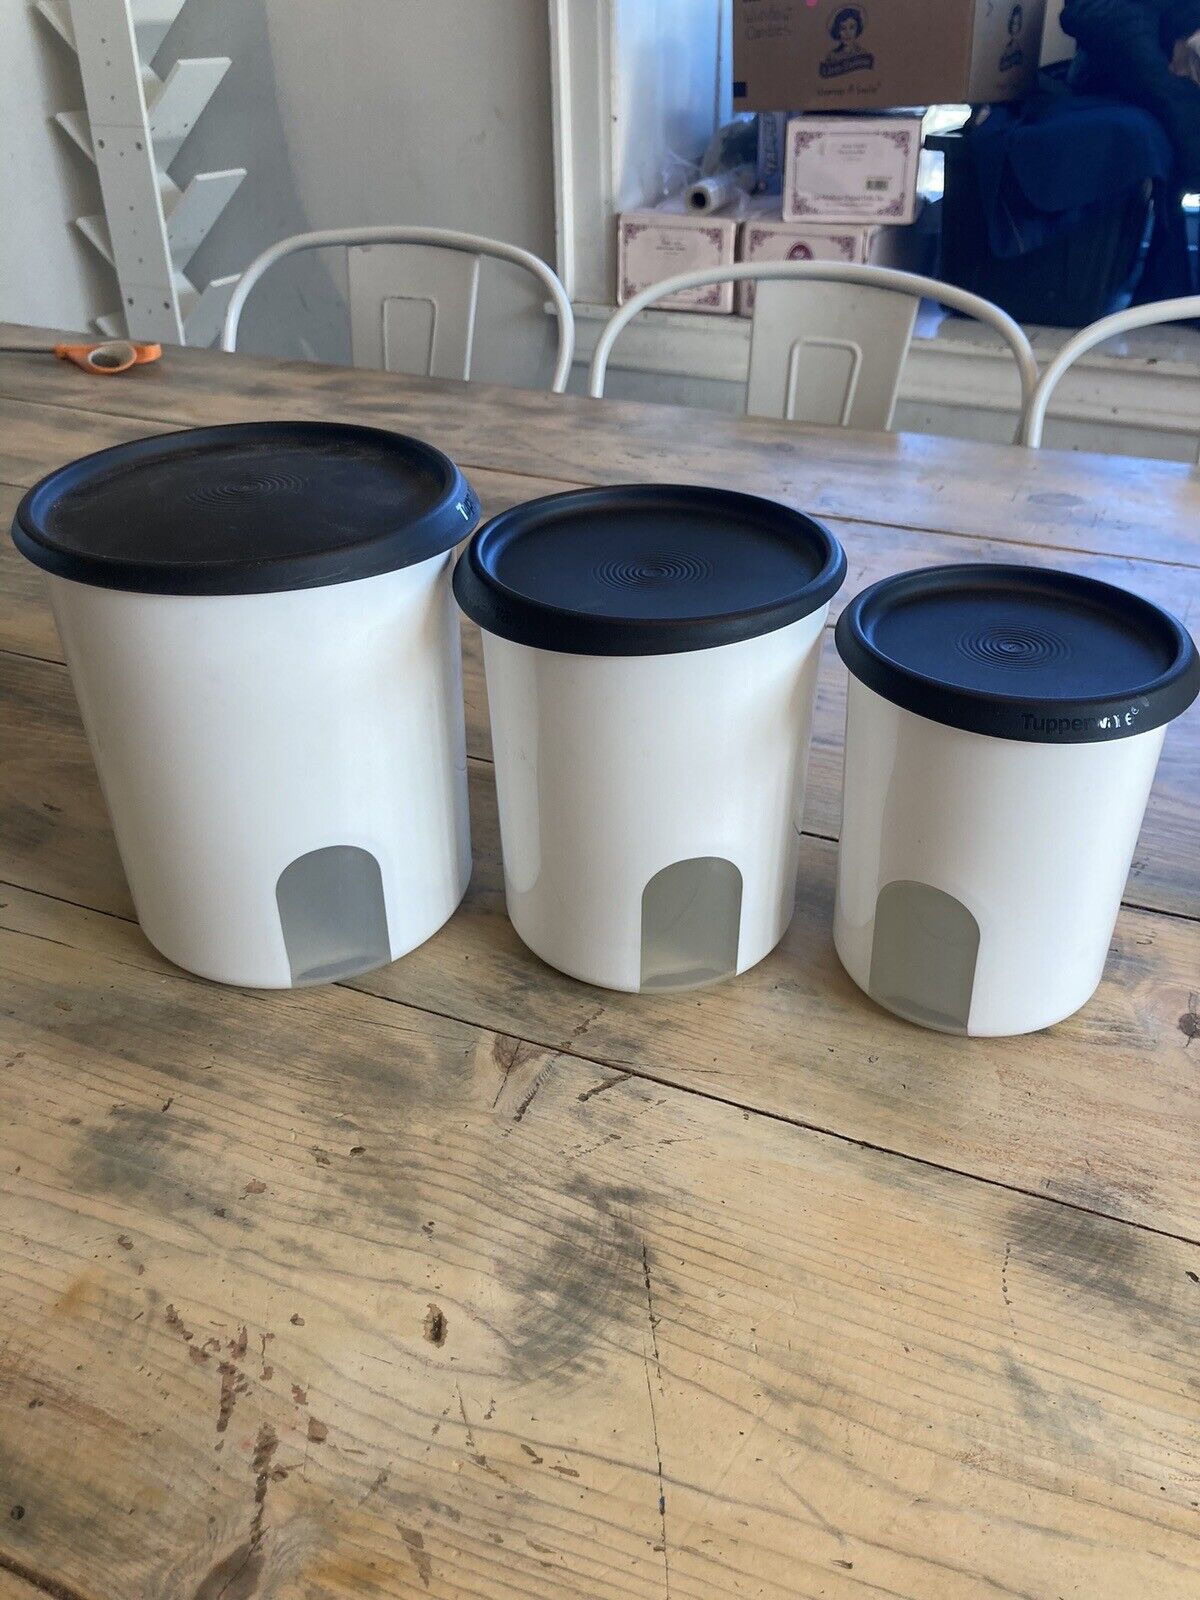 Tupperware One Touch Canister Set 3 pc Black White Kitchen Storage Countertop